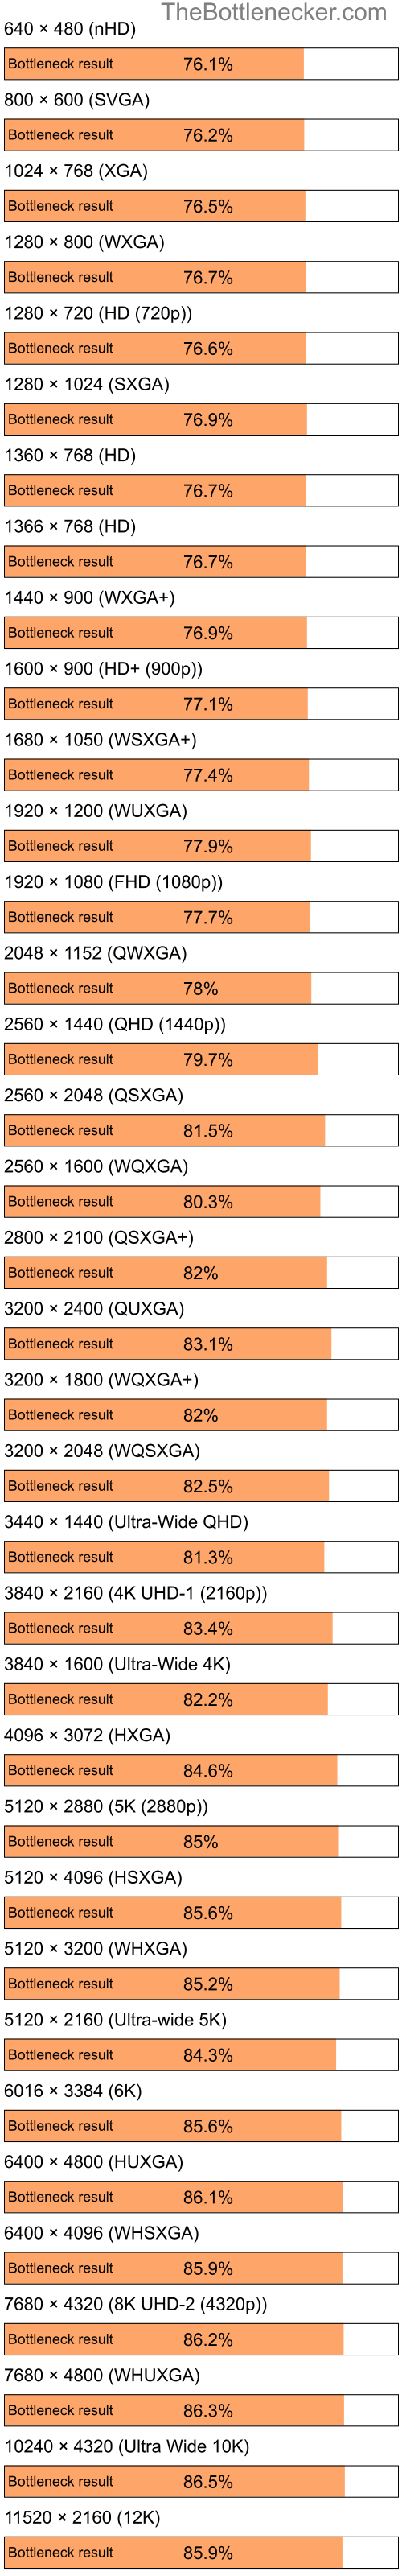 Bottleneck results by resolution for Intel Pentium 4 and NVIDIA nForce 630a in General Tasks